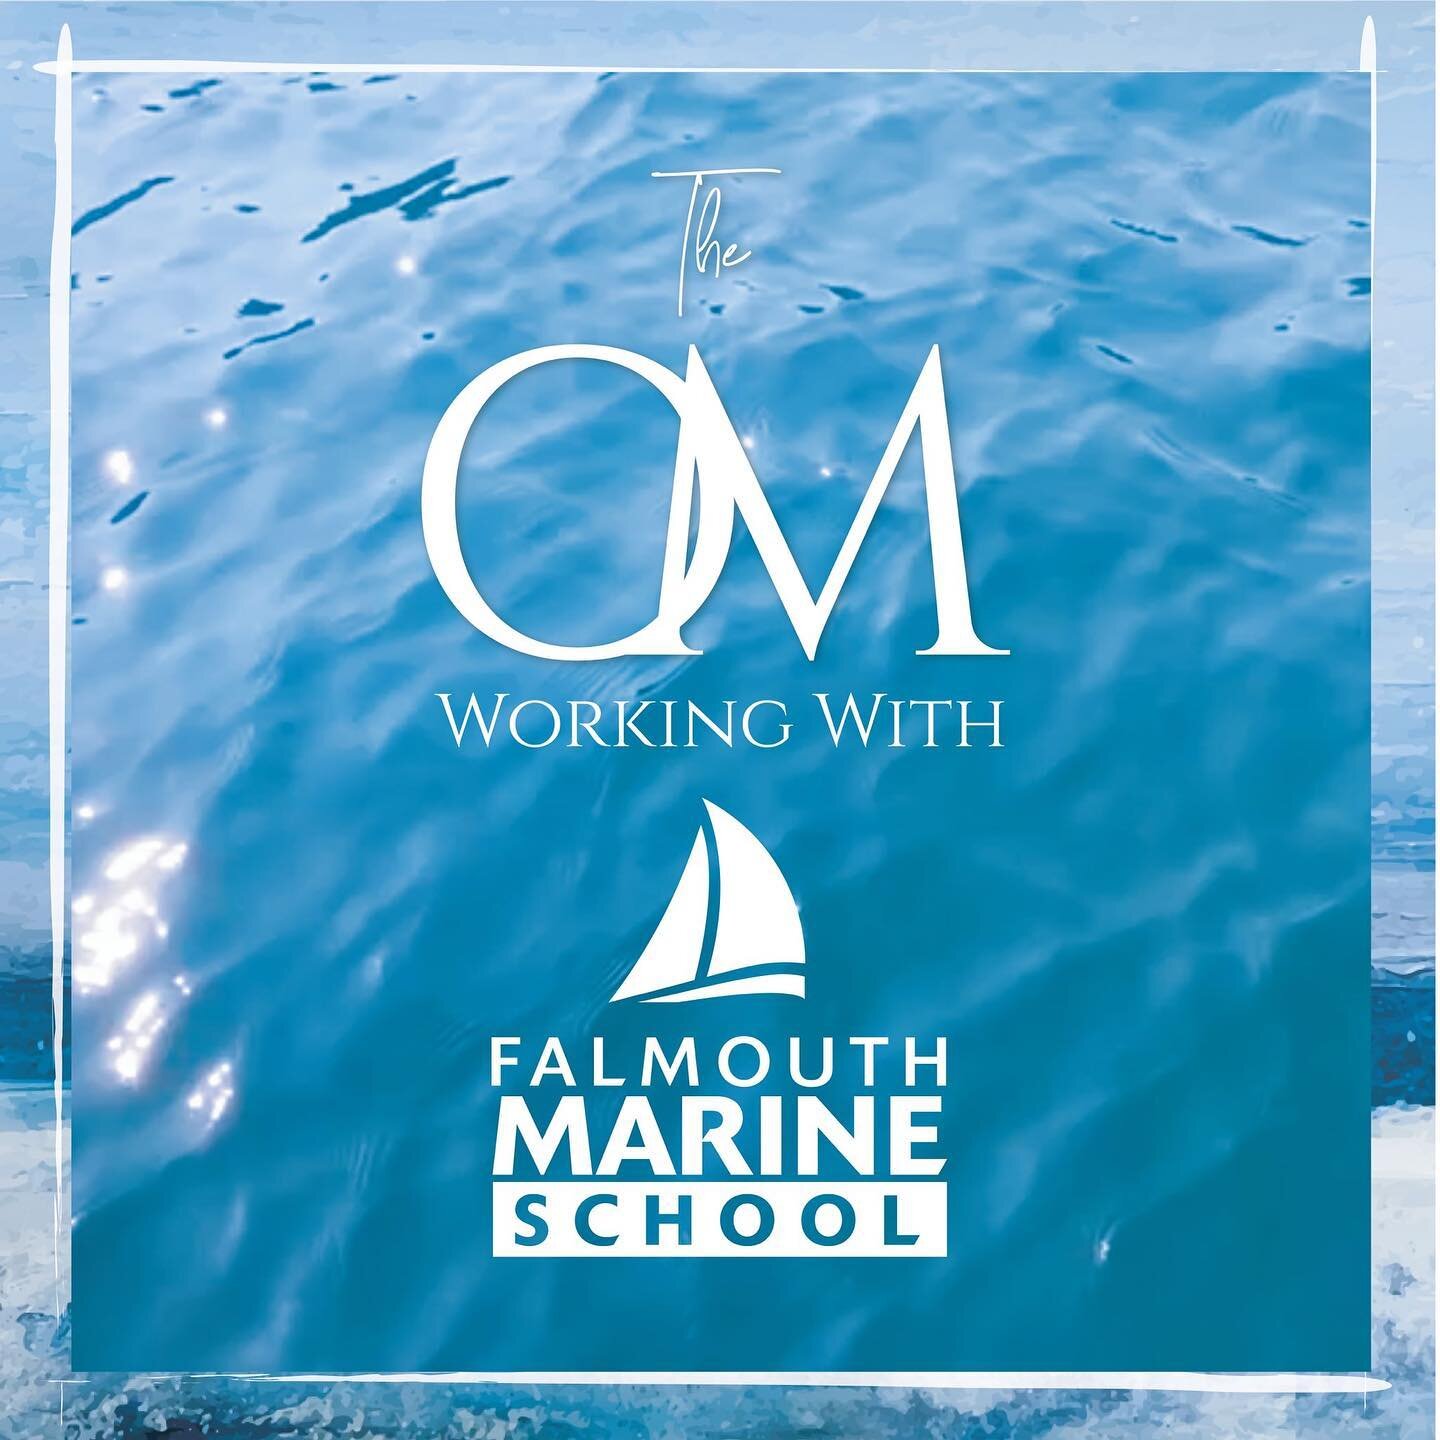 Innovate Advocate Collaborate Educate
 
I am delighted to announce that I am working with Falmouth Marine School (FMS) as a consultant on their Strategic Development Fund project &ldquo;Building Sustainable Futures&rdquo;. 

It is a real pleasure to 